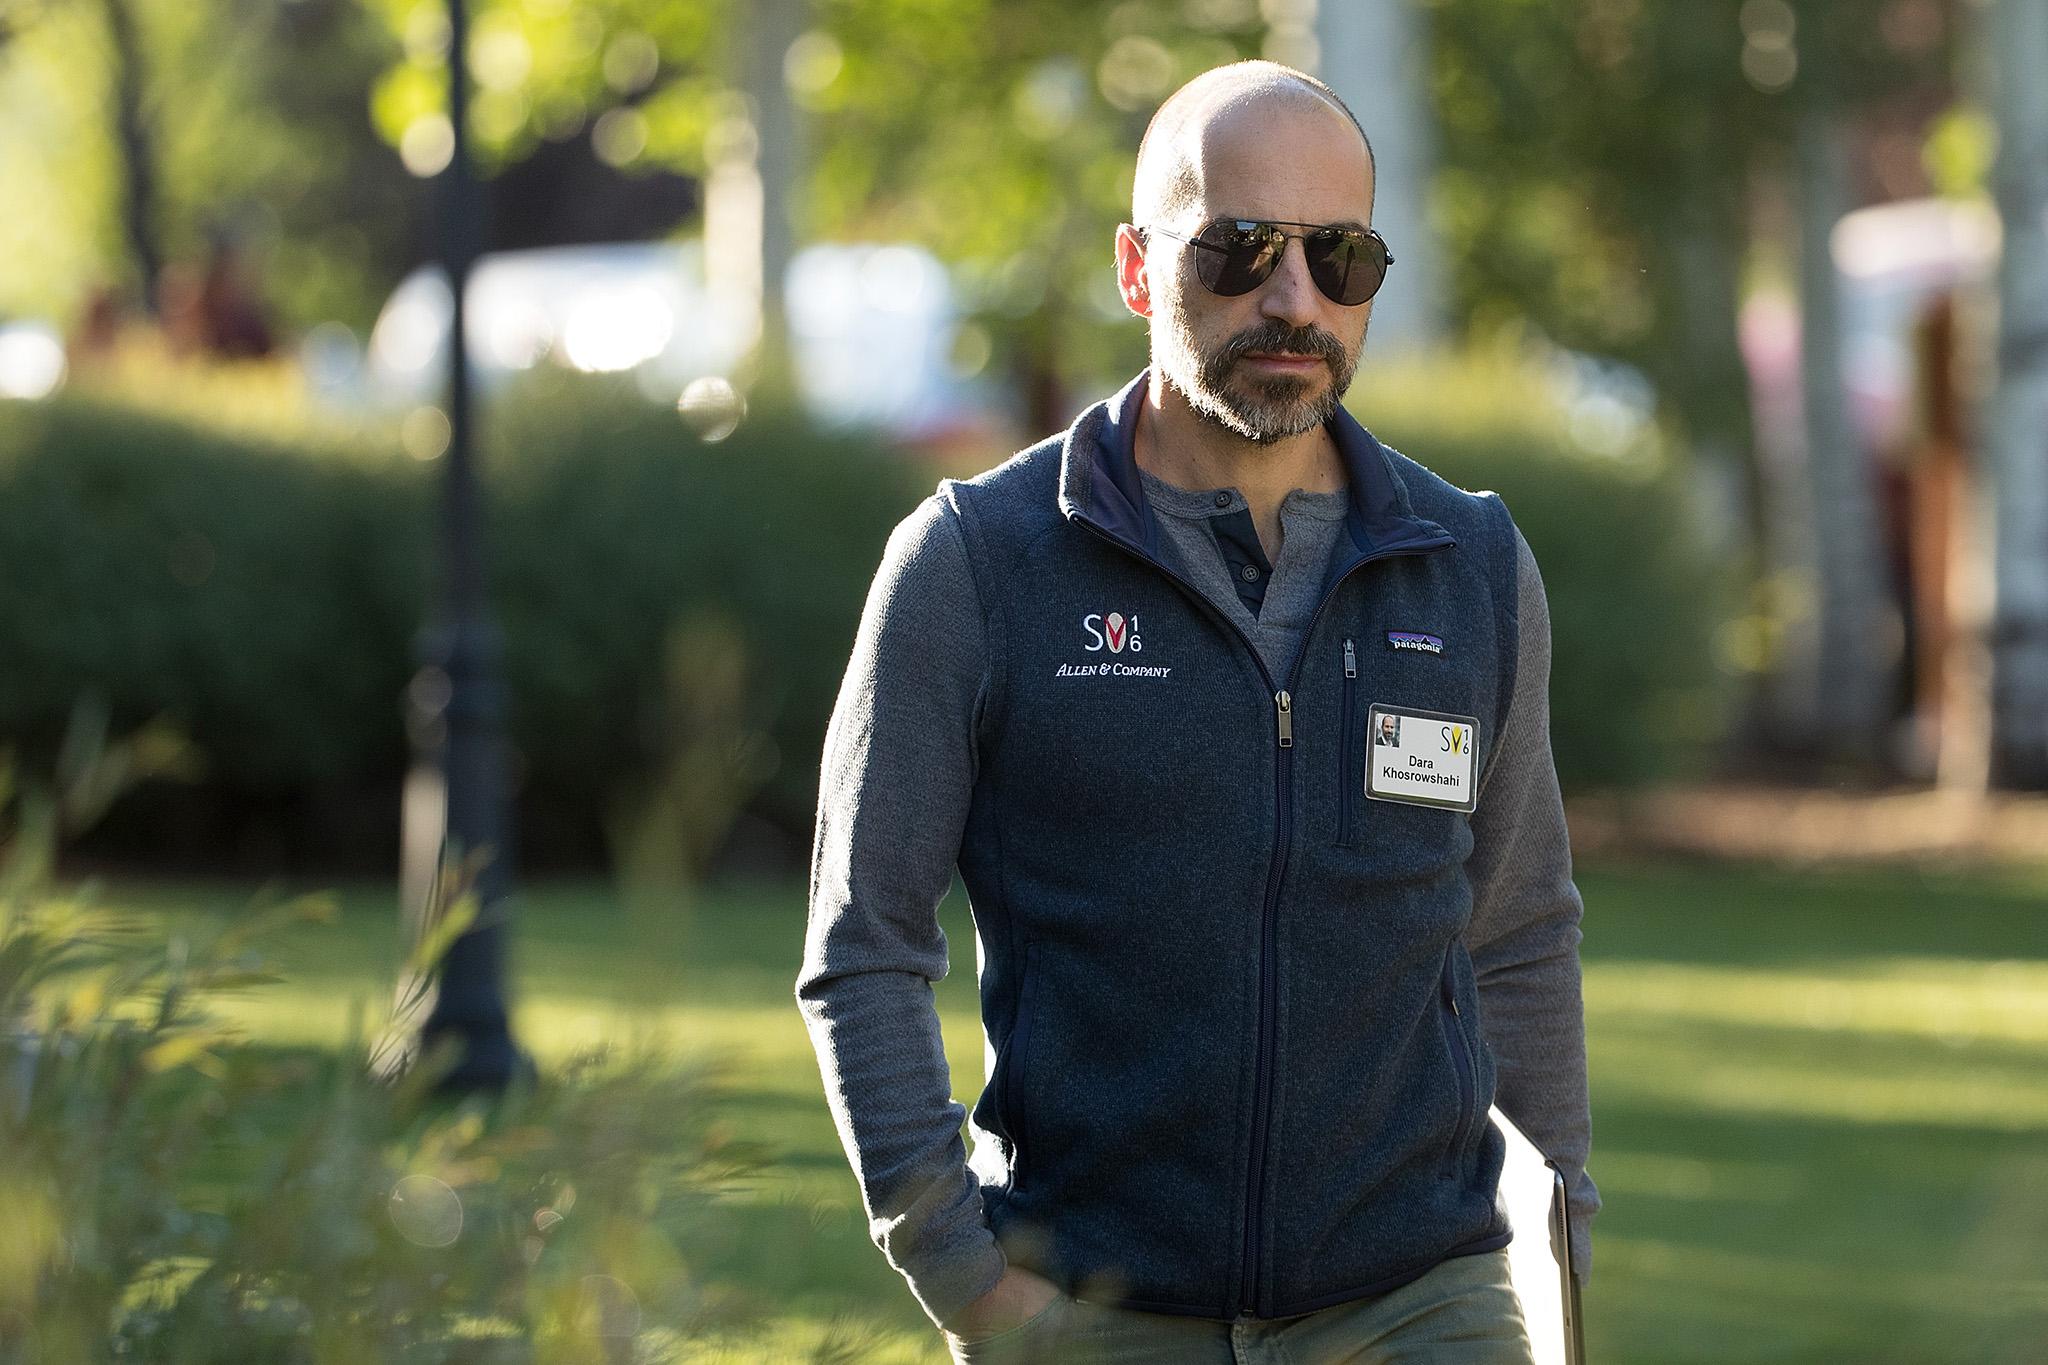 Dara Khosrowshahi is set to take over at Uber, after a year of scandal for the company